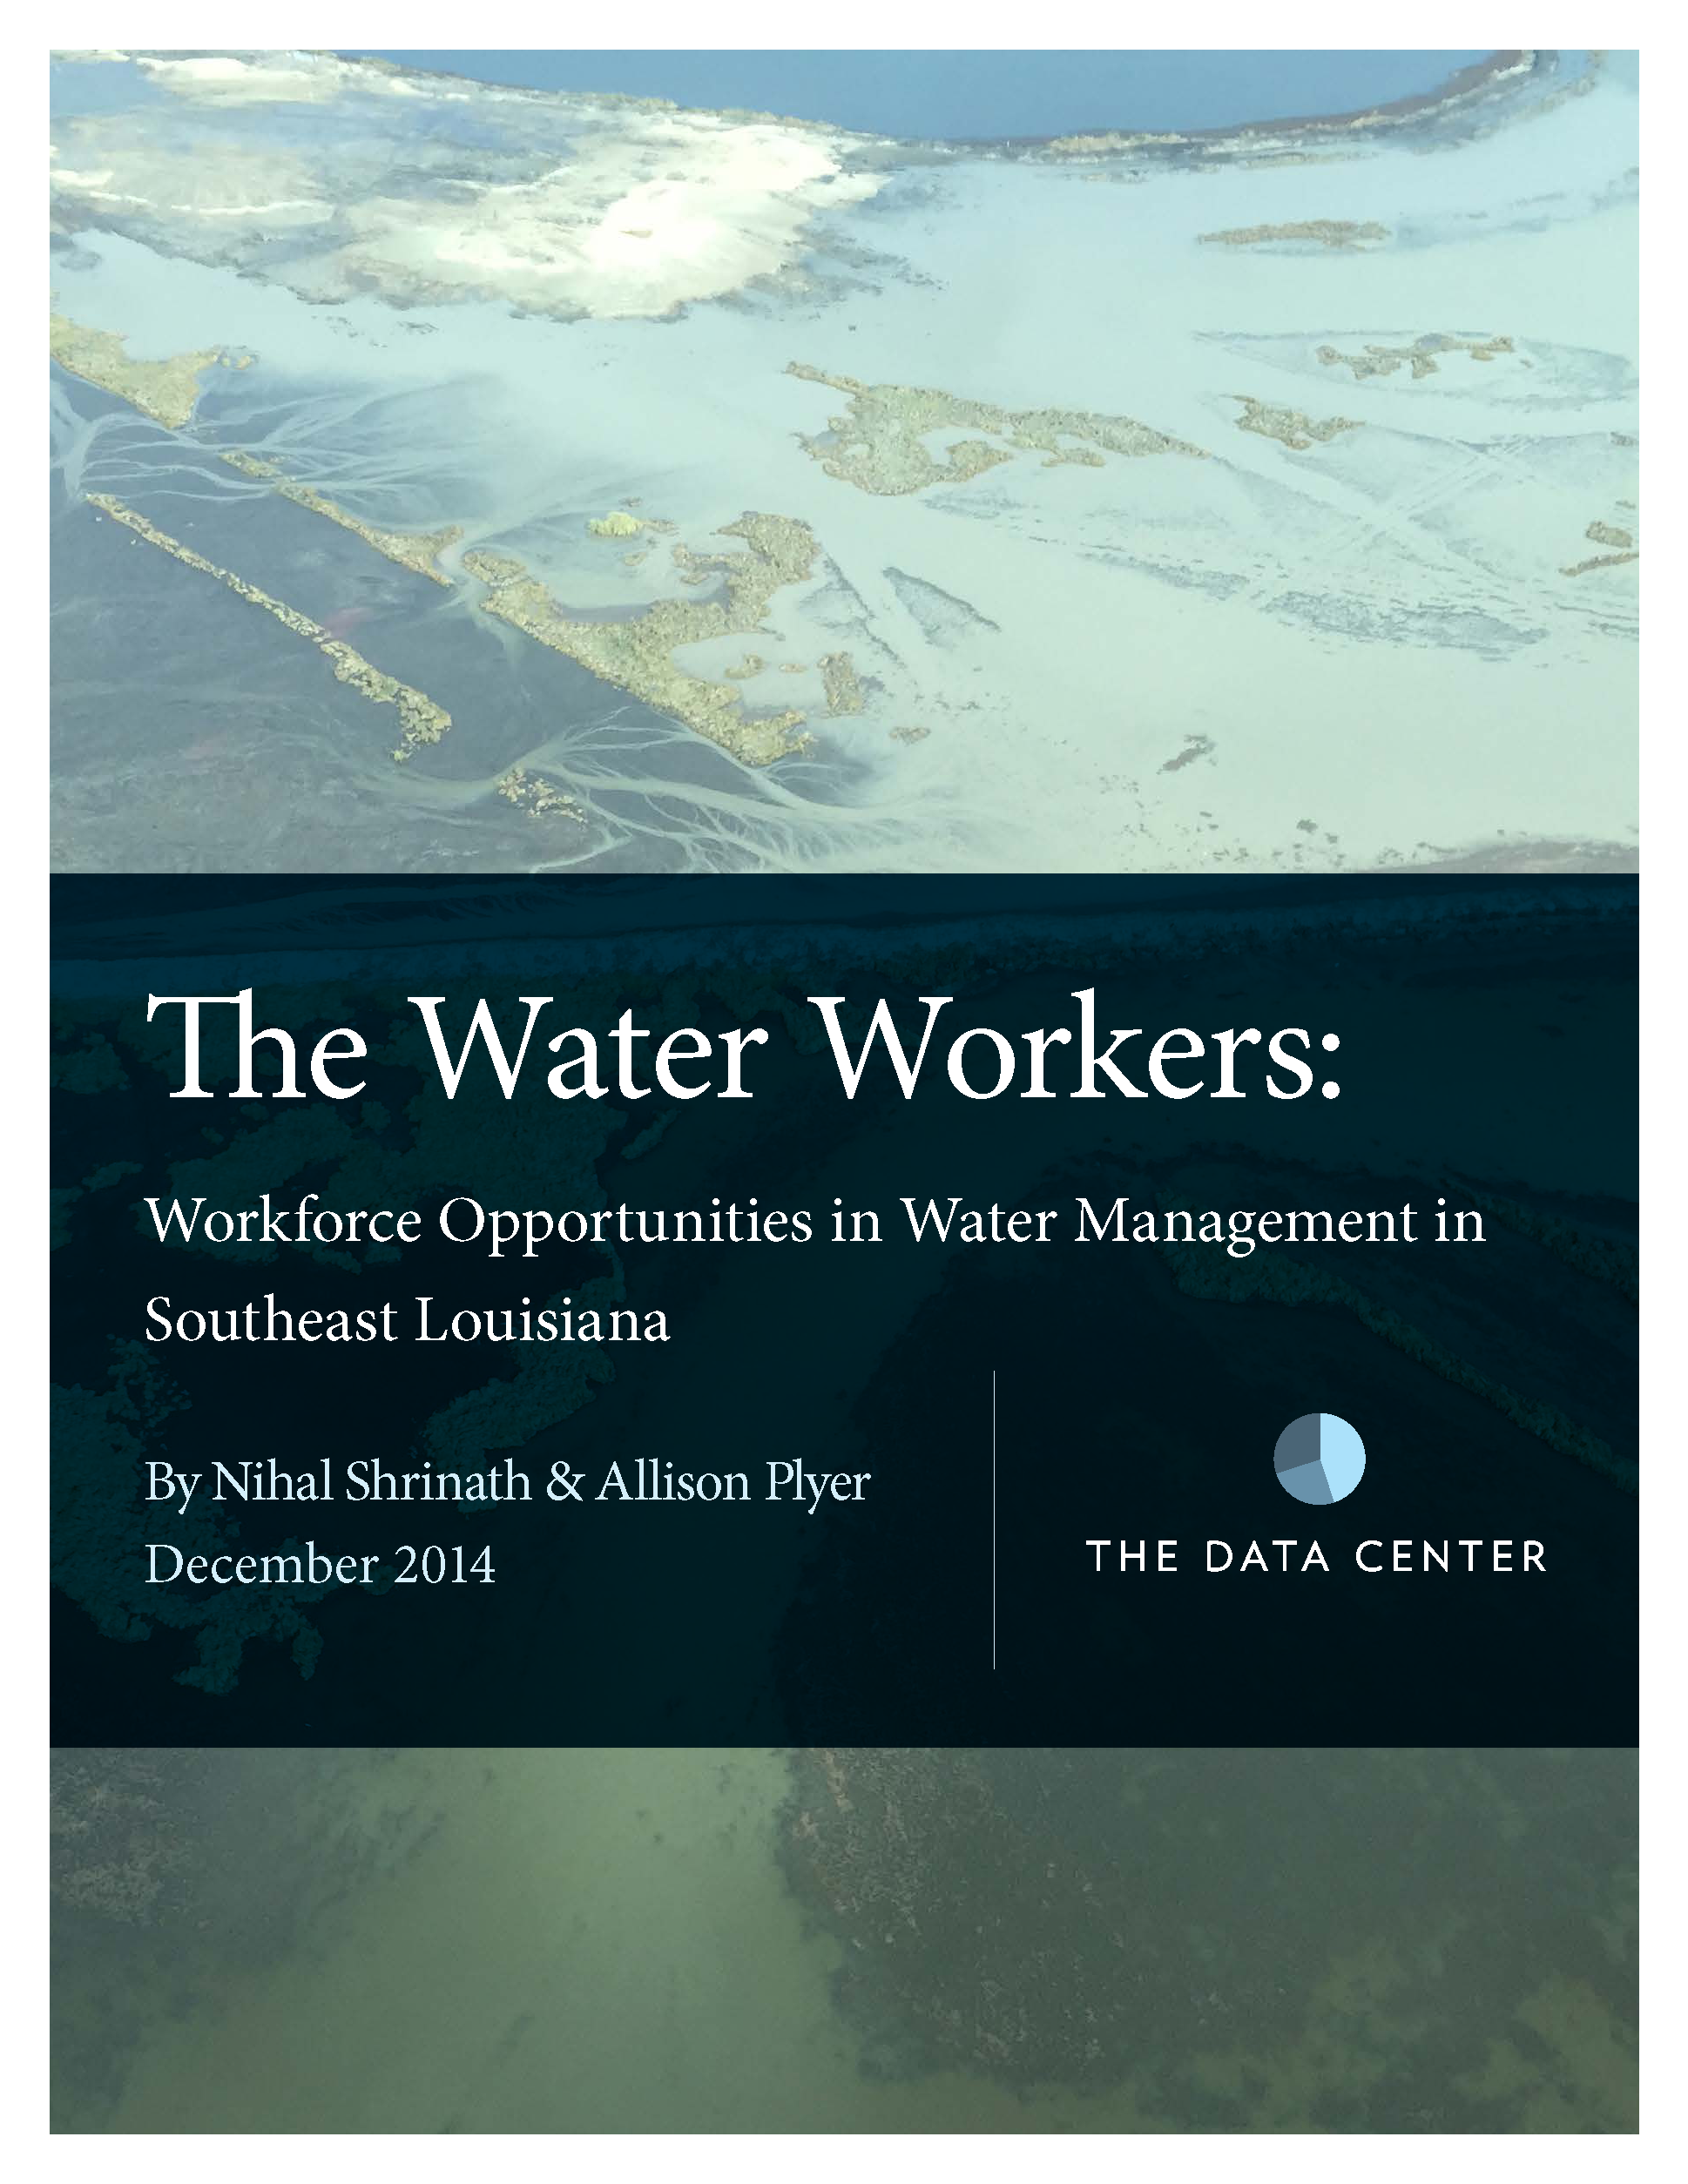 The Water Workers: Workforce Opportunities in Water Management in Southeast Louisiana